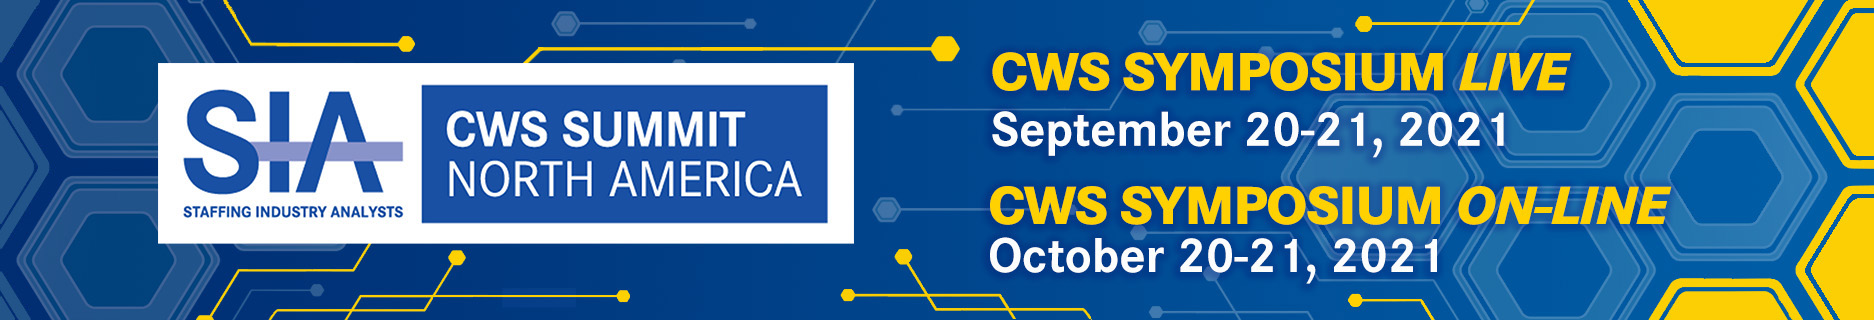 CWSNA Conference header